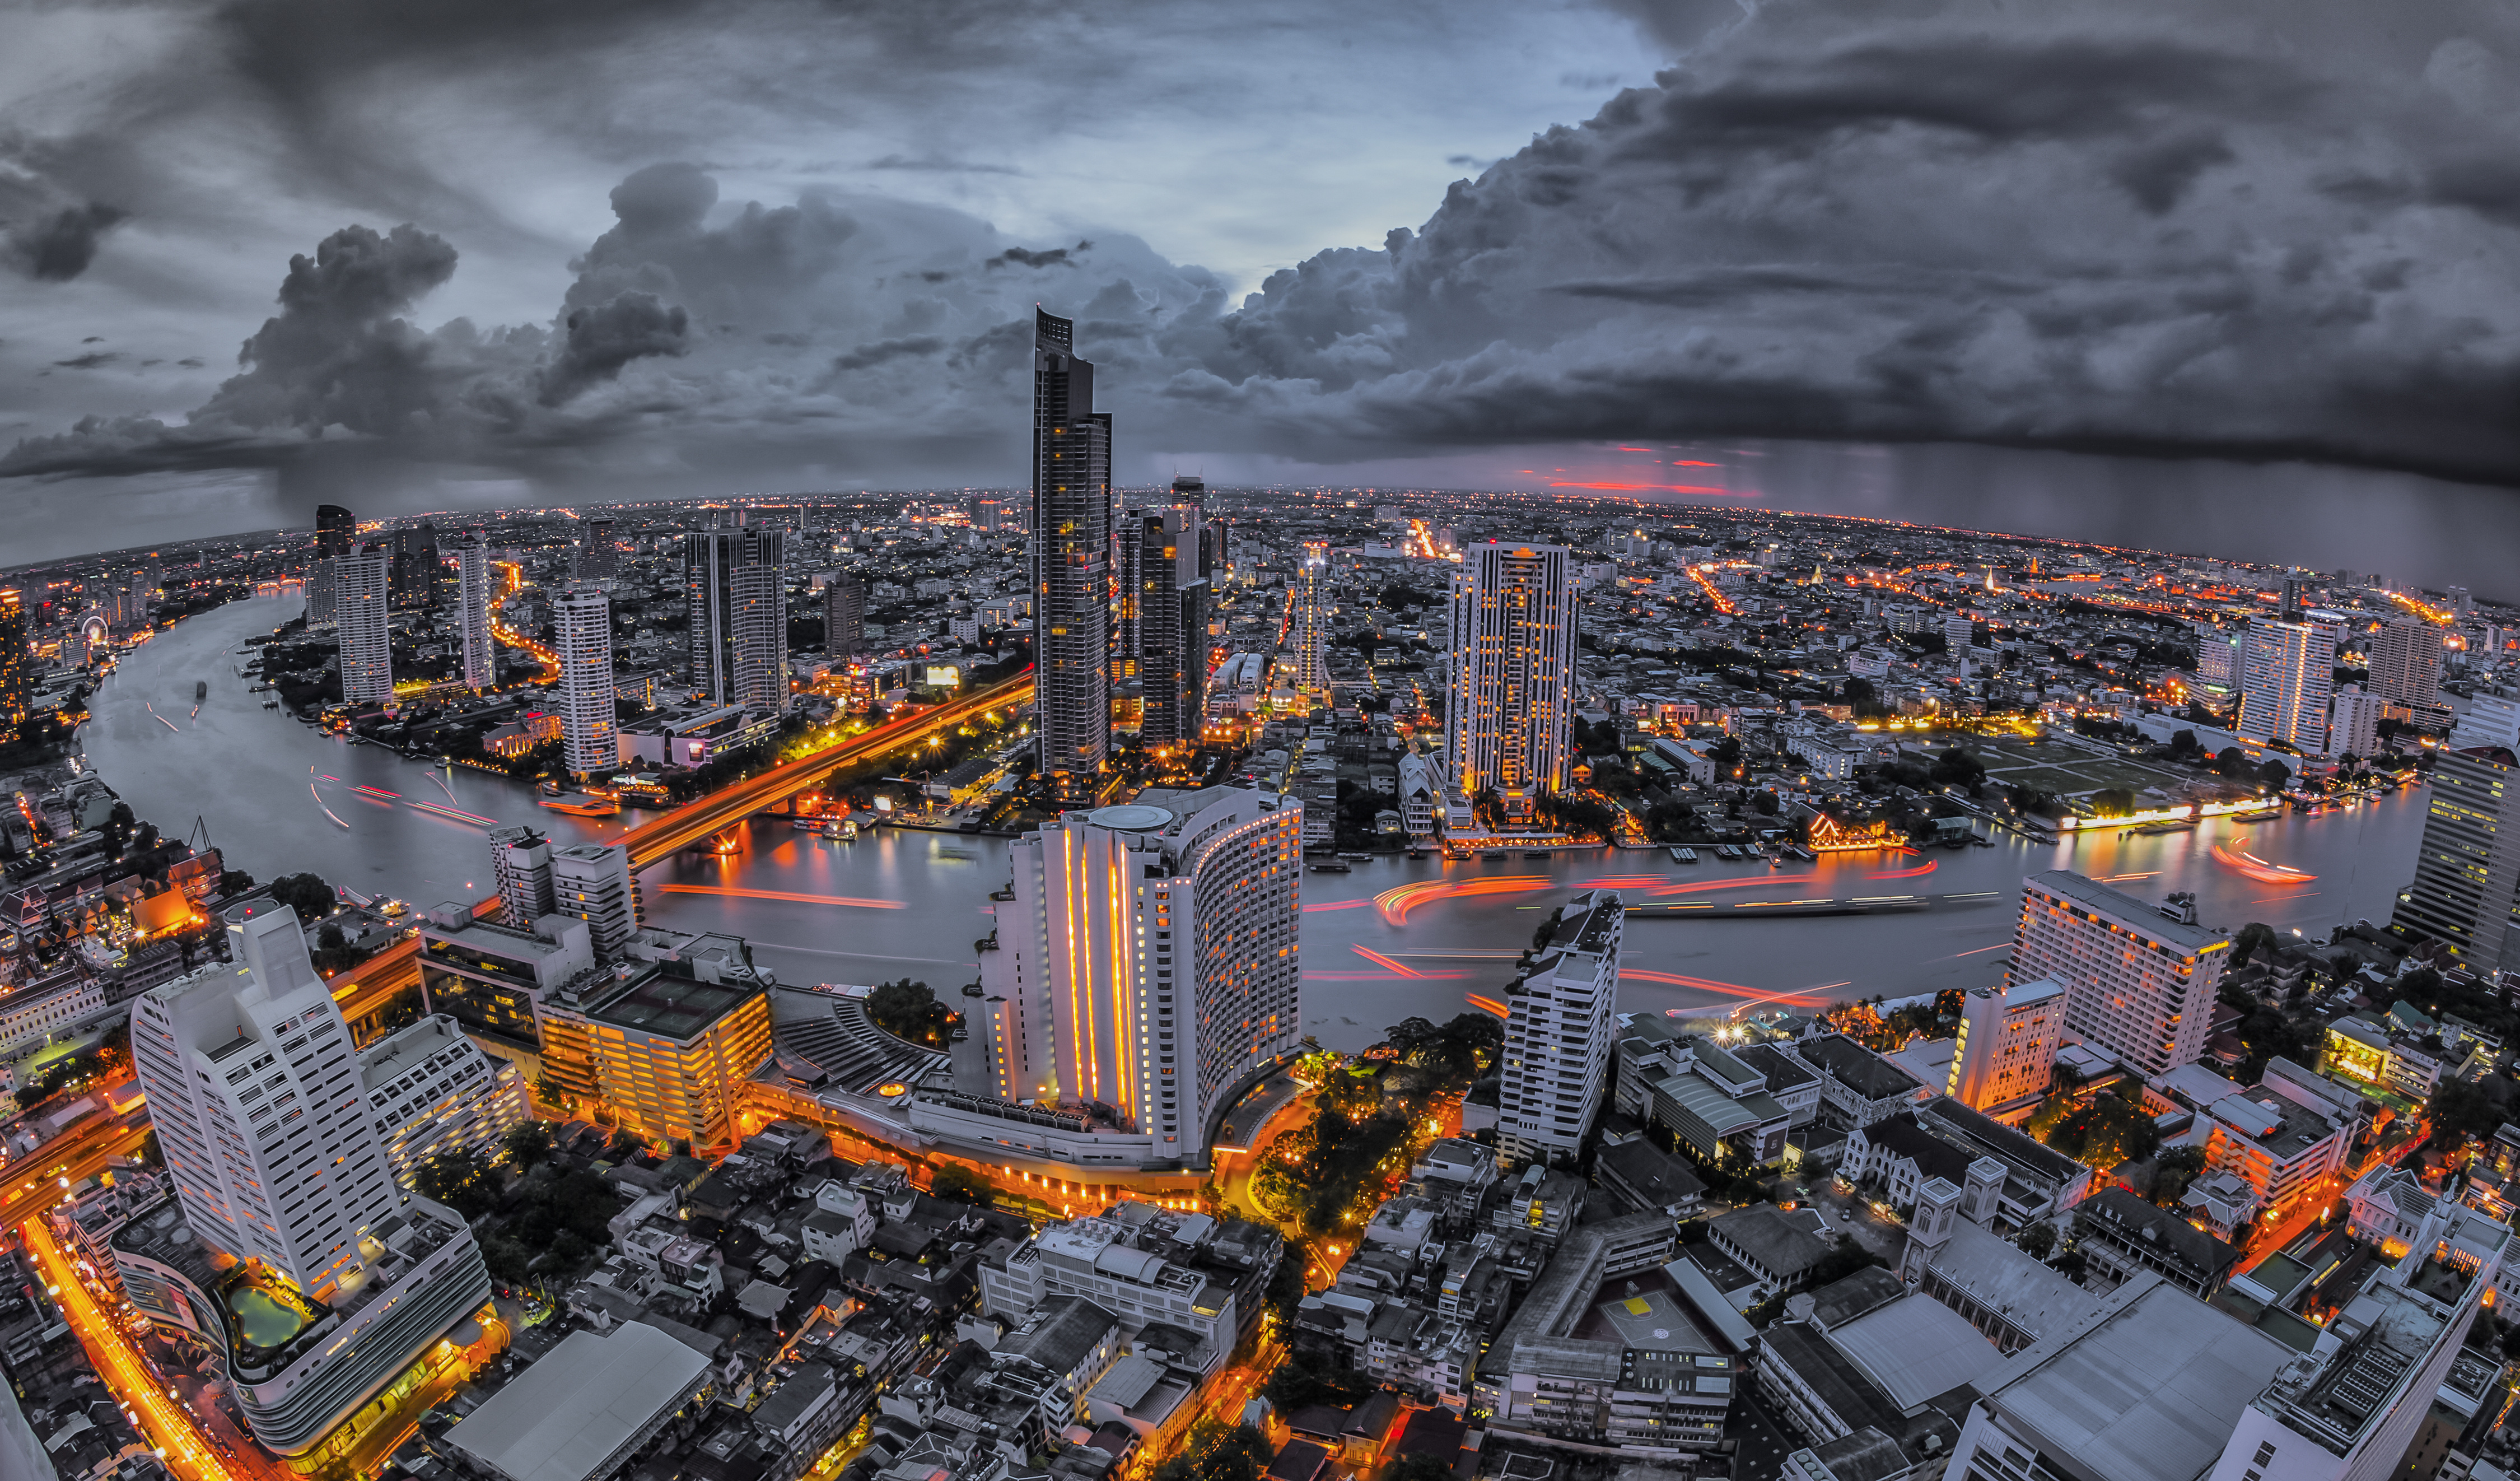 cities, bangkok, view from above, night city, skyscrapers, megapolis, megalopolis UHD